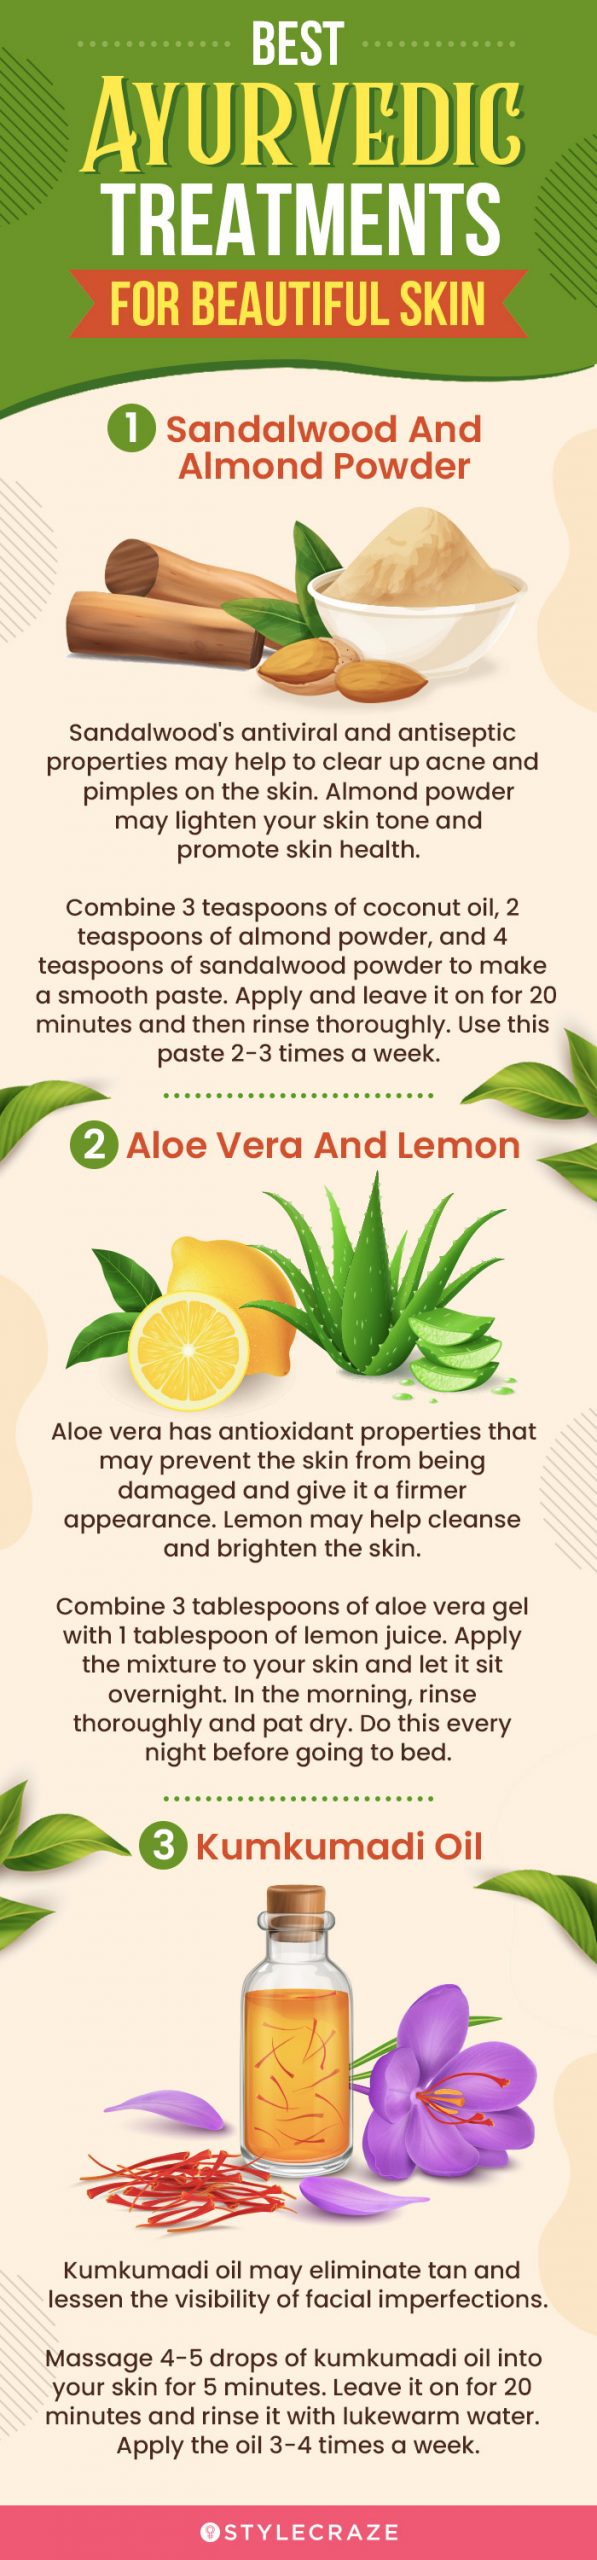 best ayurvedic treatments for beautiful skin (infographic)